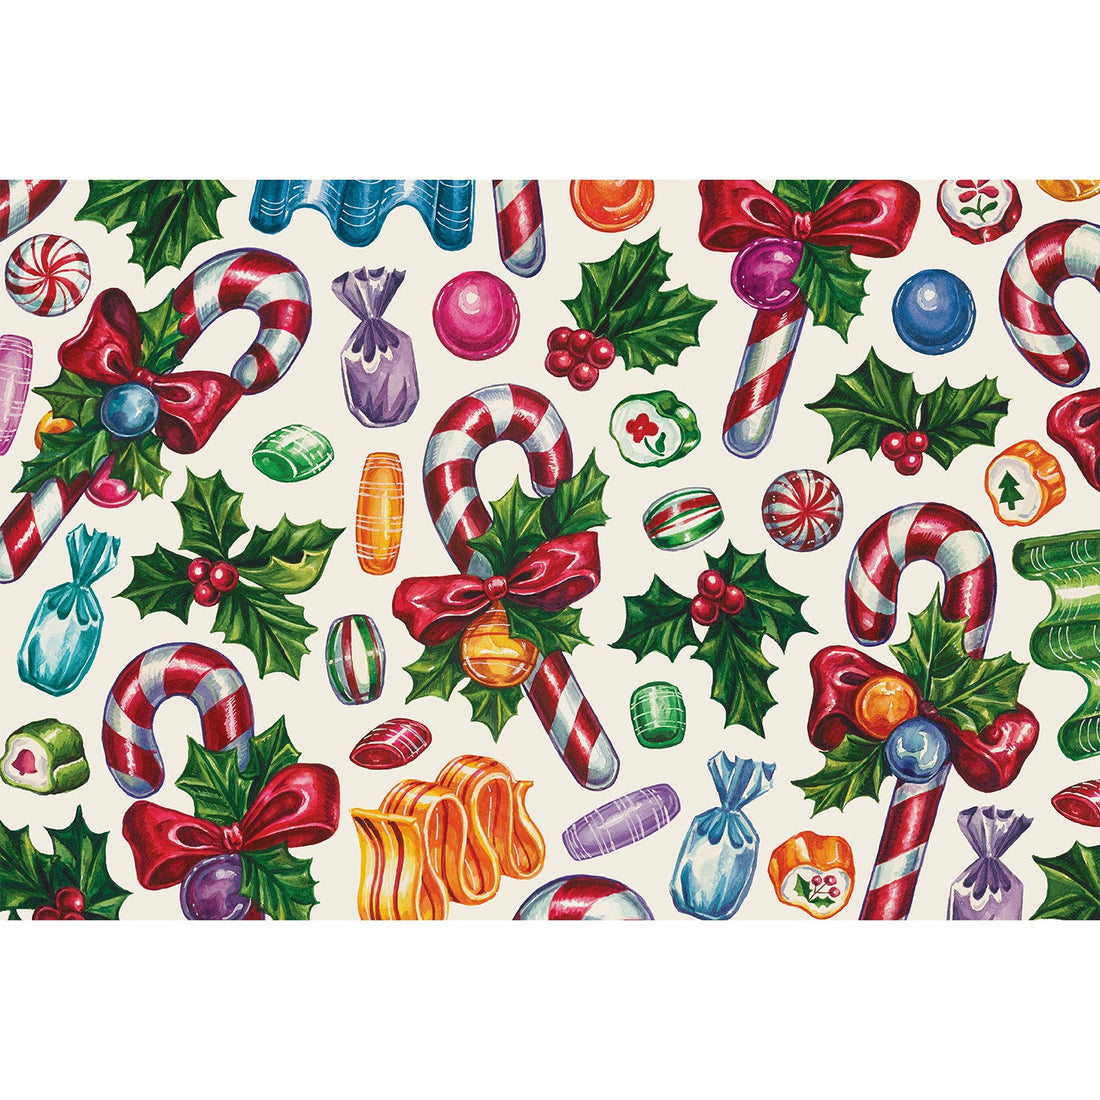 A festive illustrated scatter of vintage candy canes, sprigs of holly and Christmas candies over a white background.